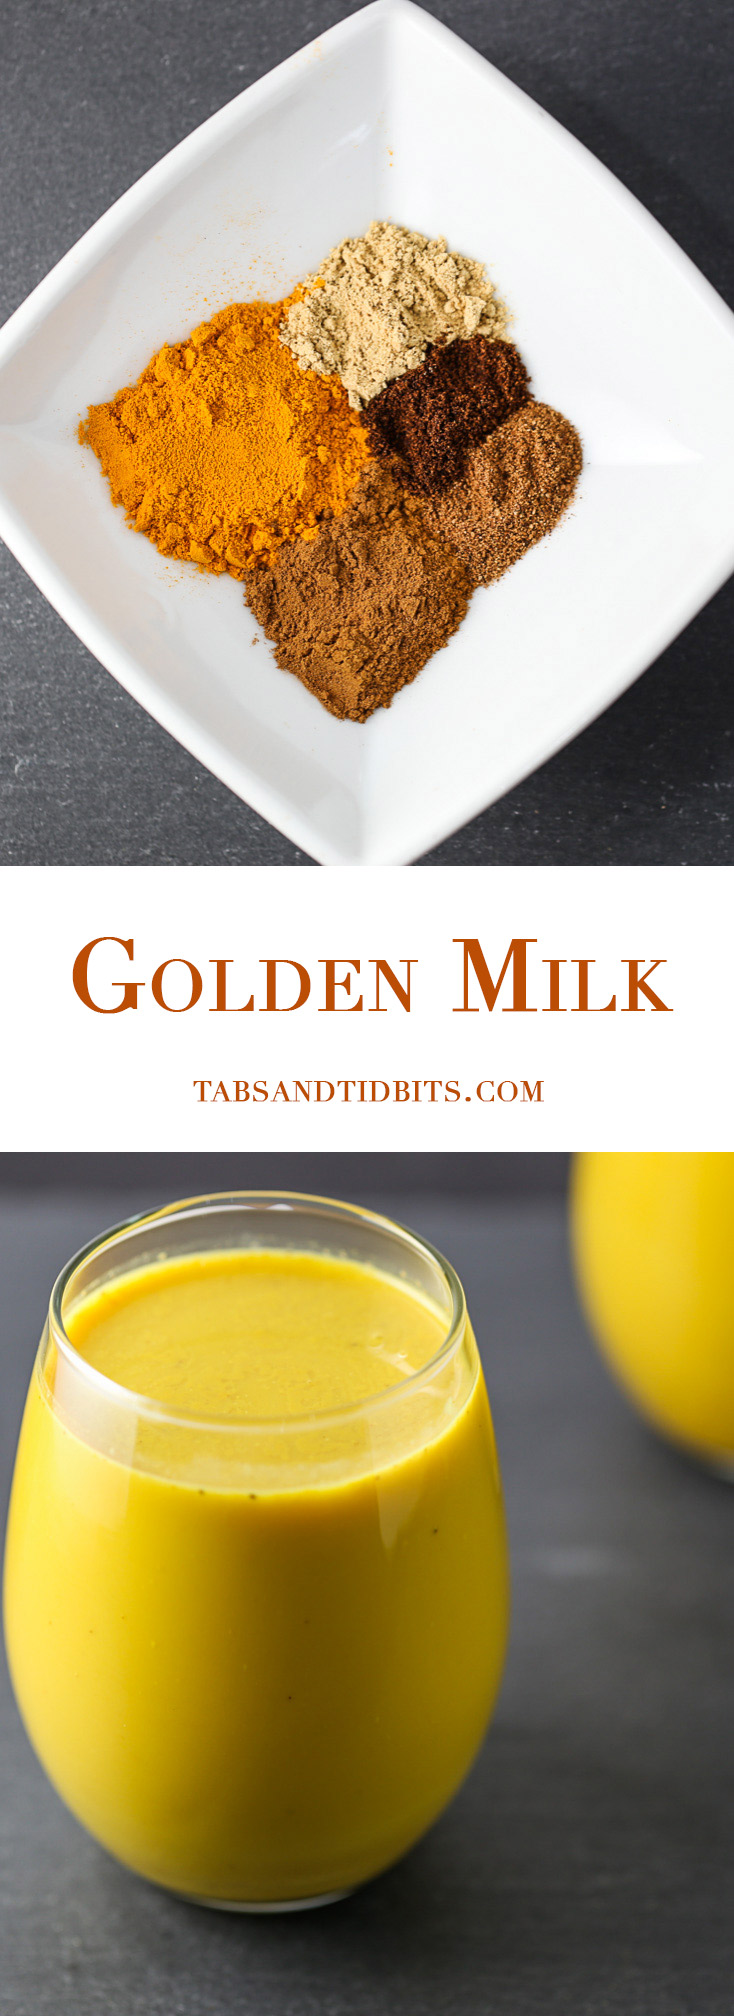 Golden Milk - Almond milk filled with turmeric, ginger, cinnamon and few extra spices to make this drink even more delicious!